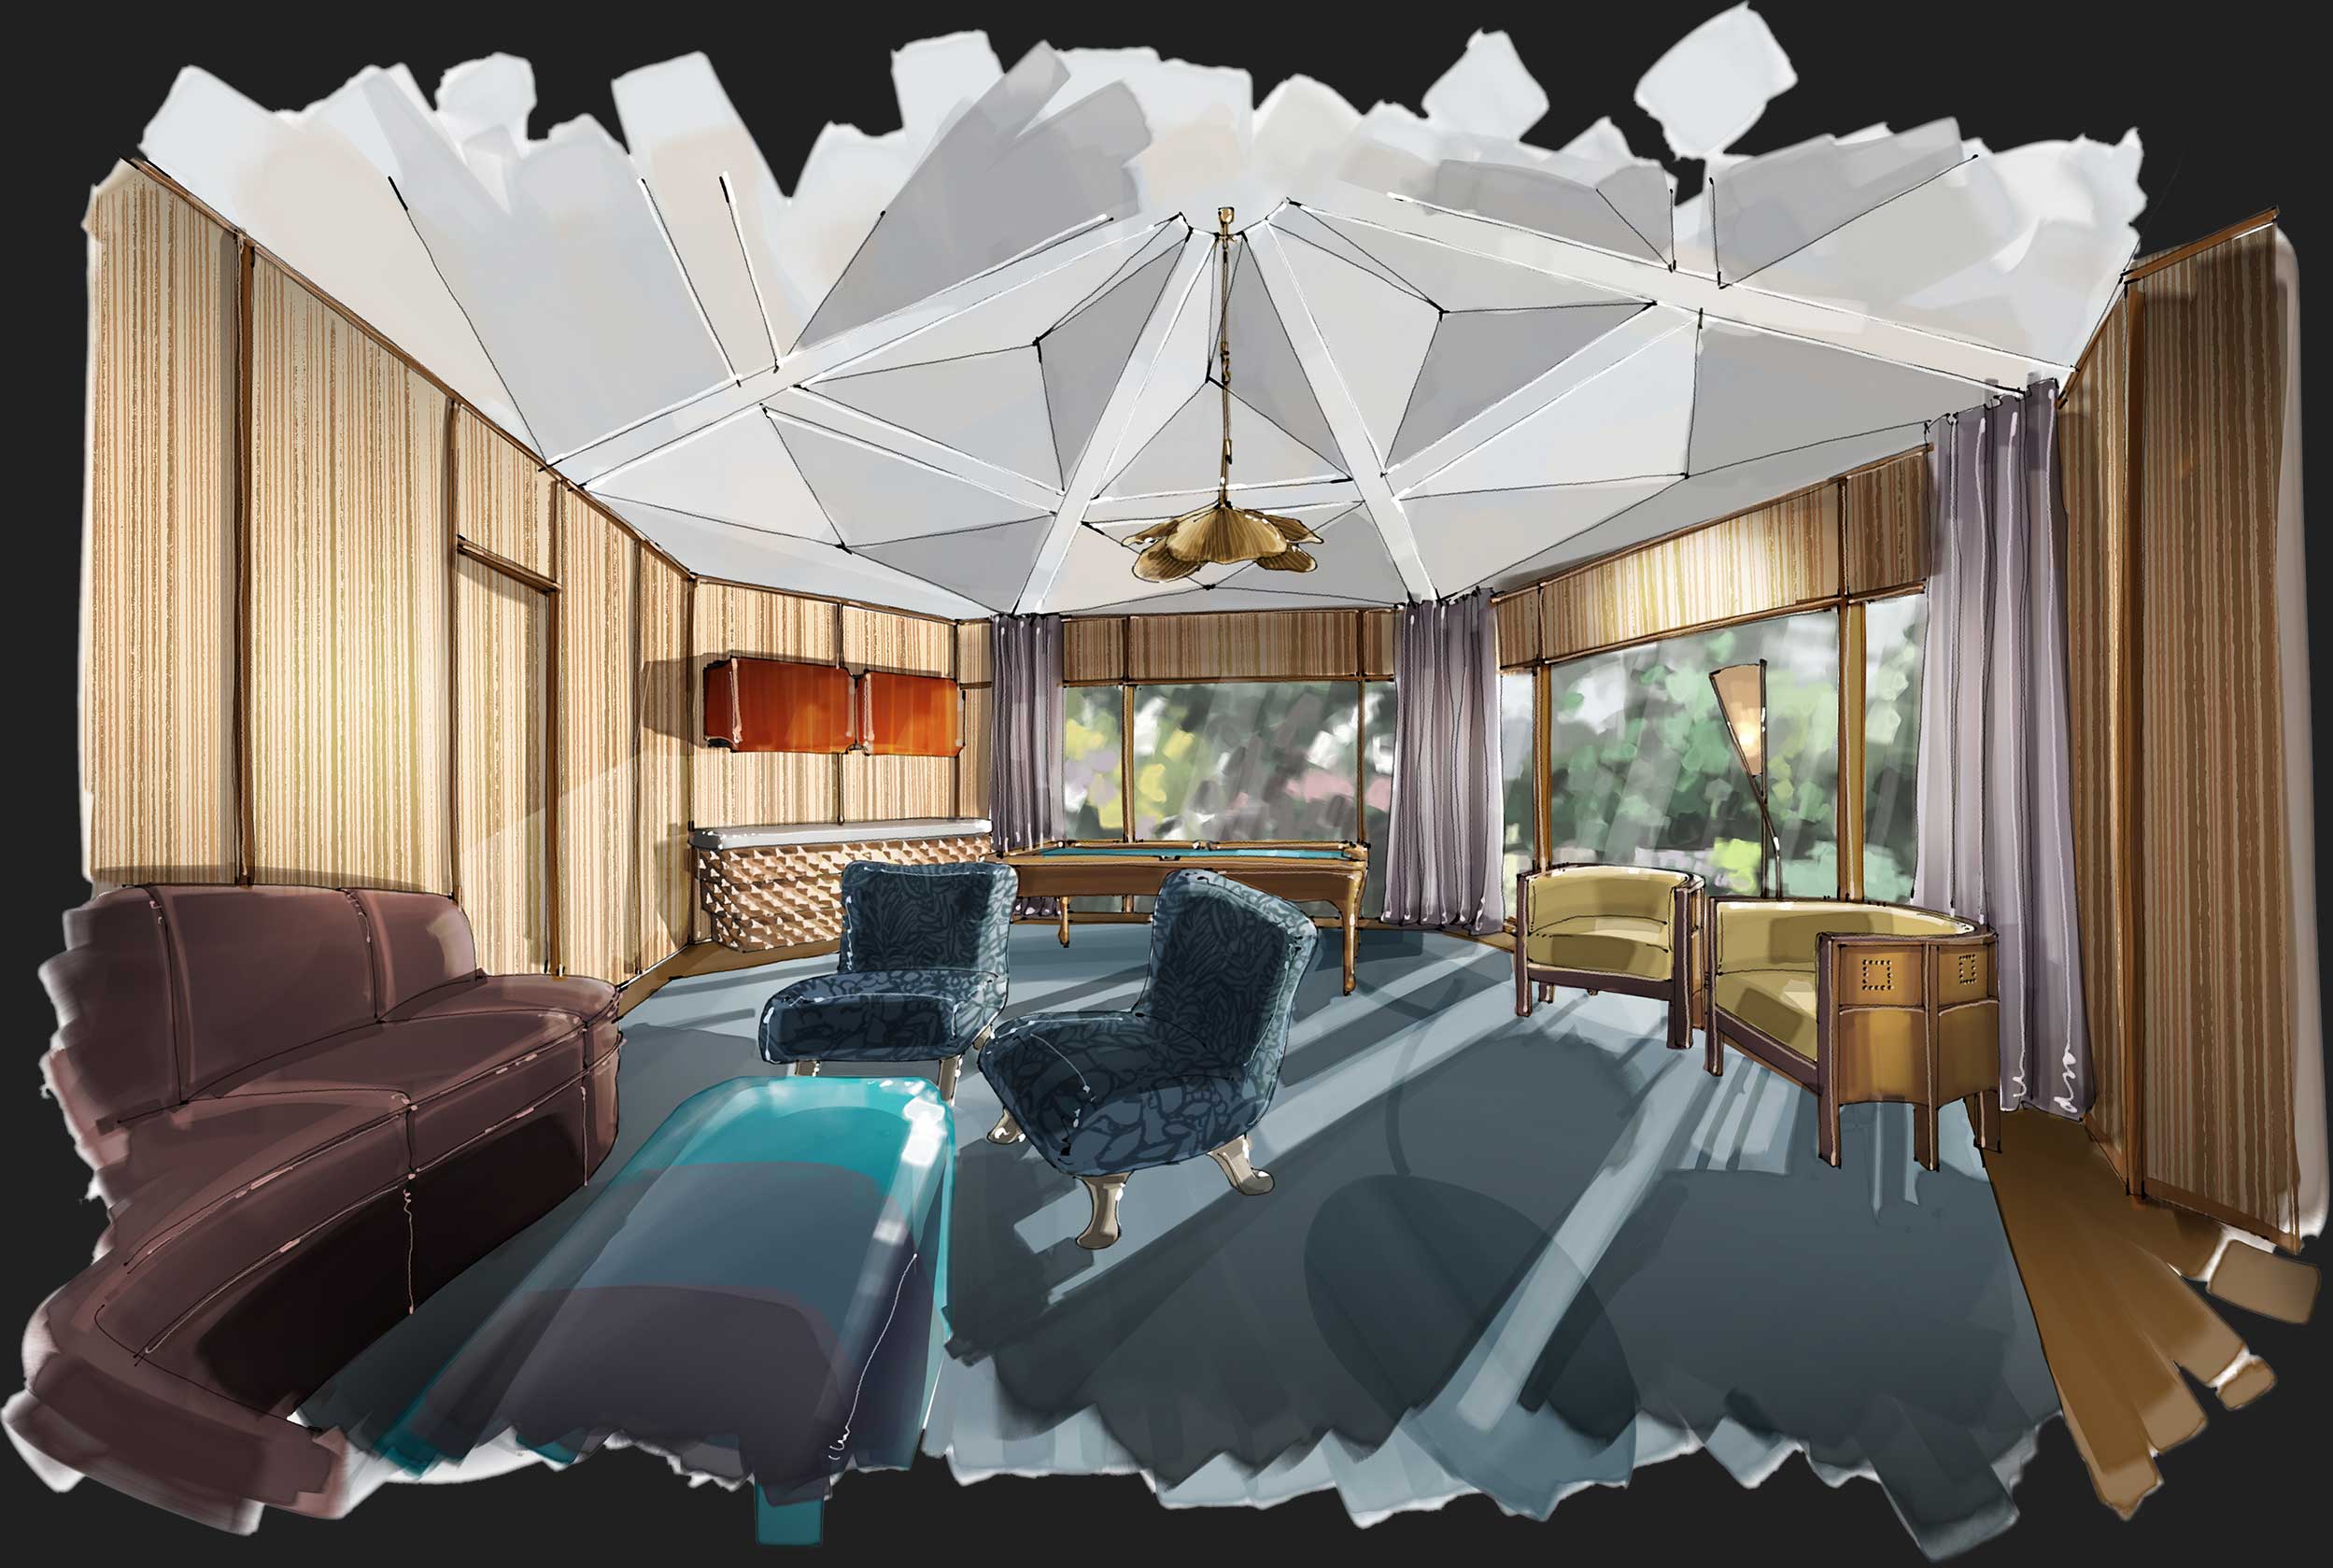 Colorful hand-drawn rendering of lounge-like game room with white geometric-patterned ceiling and dark teal and brown materials